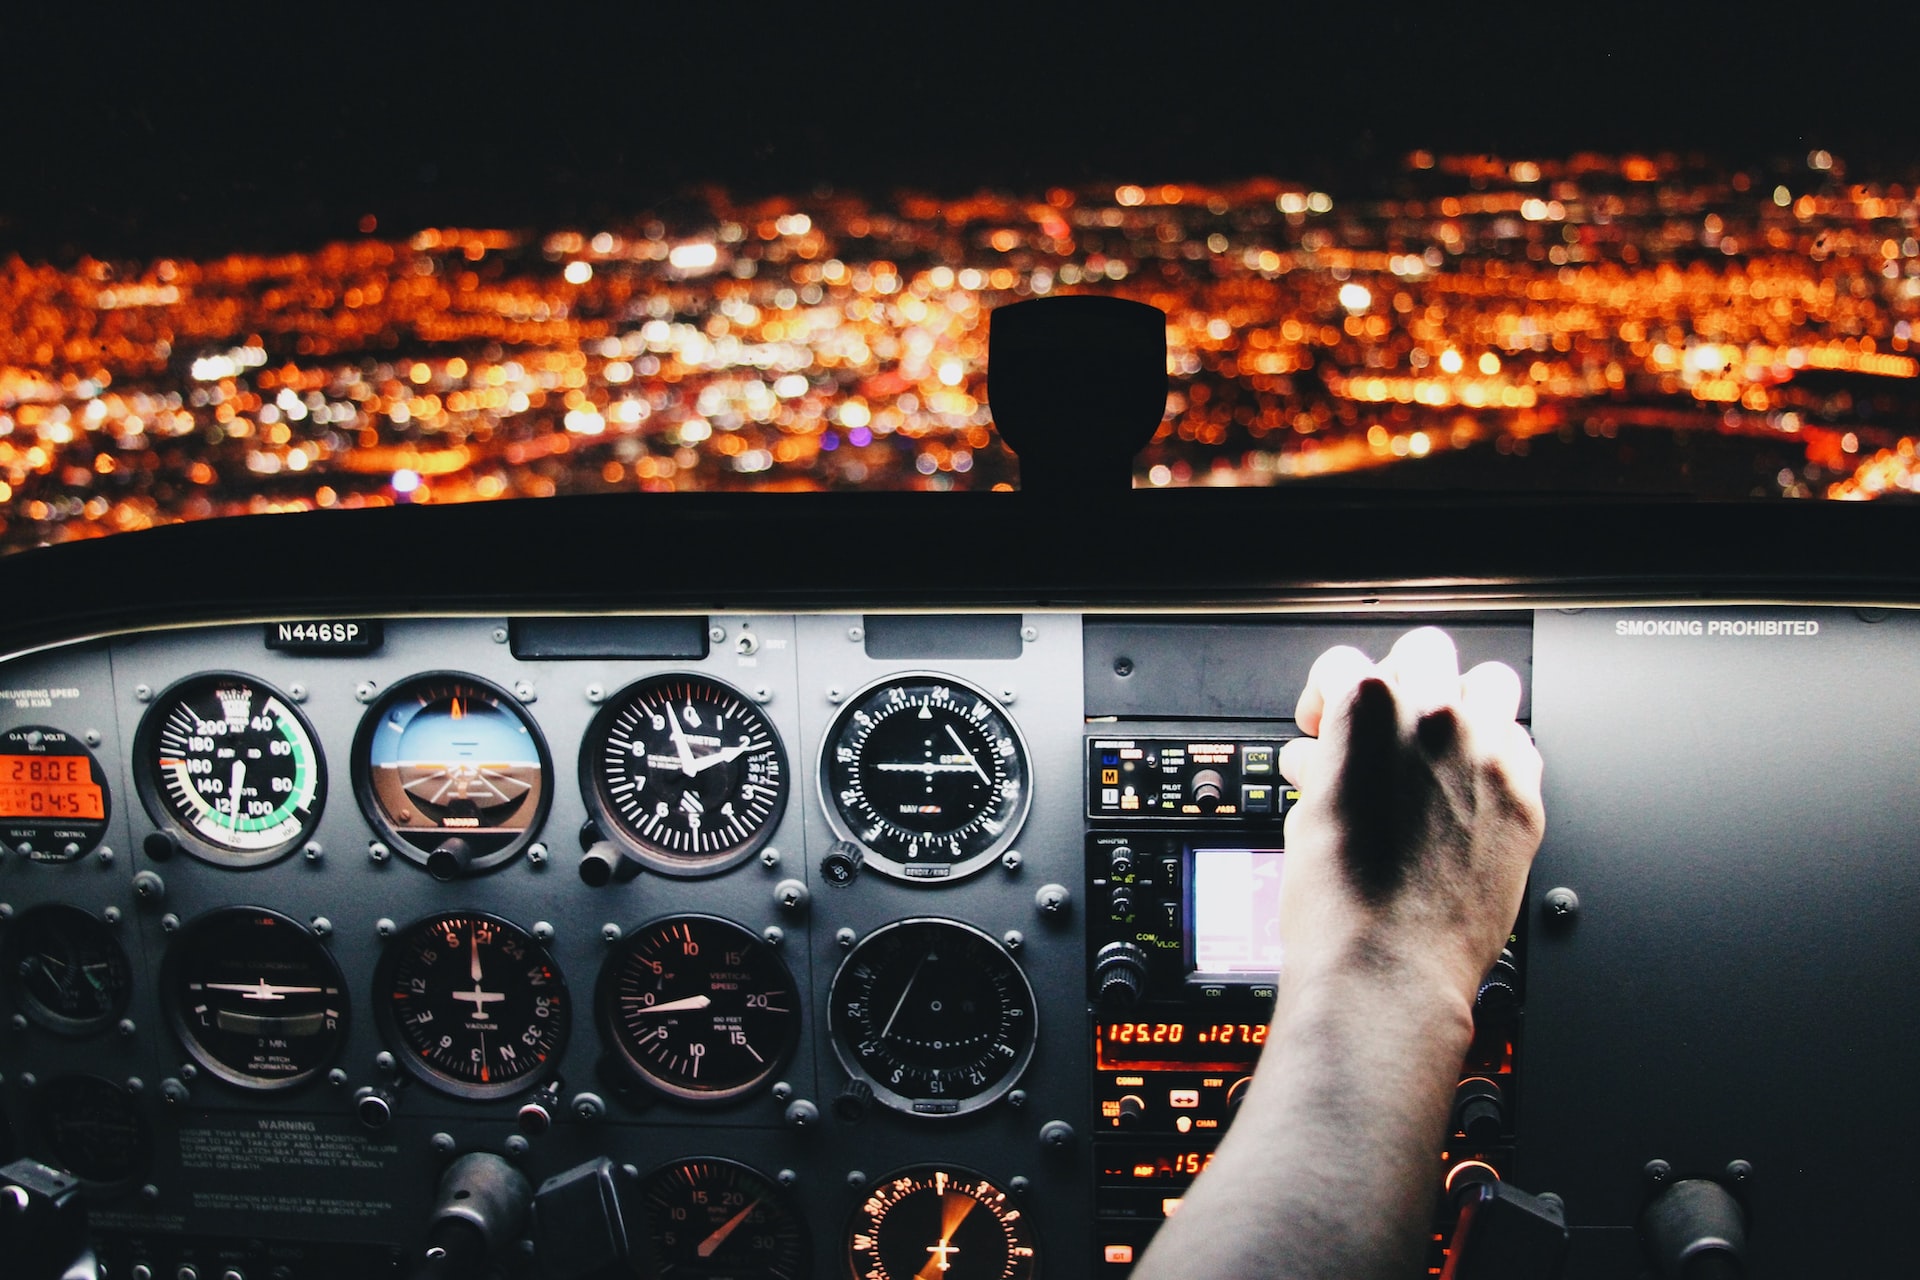 Types of Experience Flights - Costs, types of planes, what’s involved?